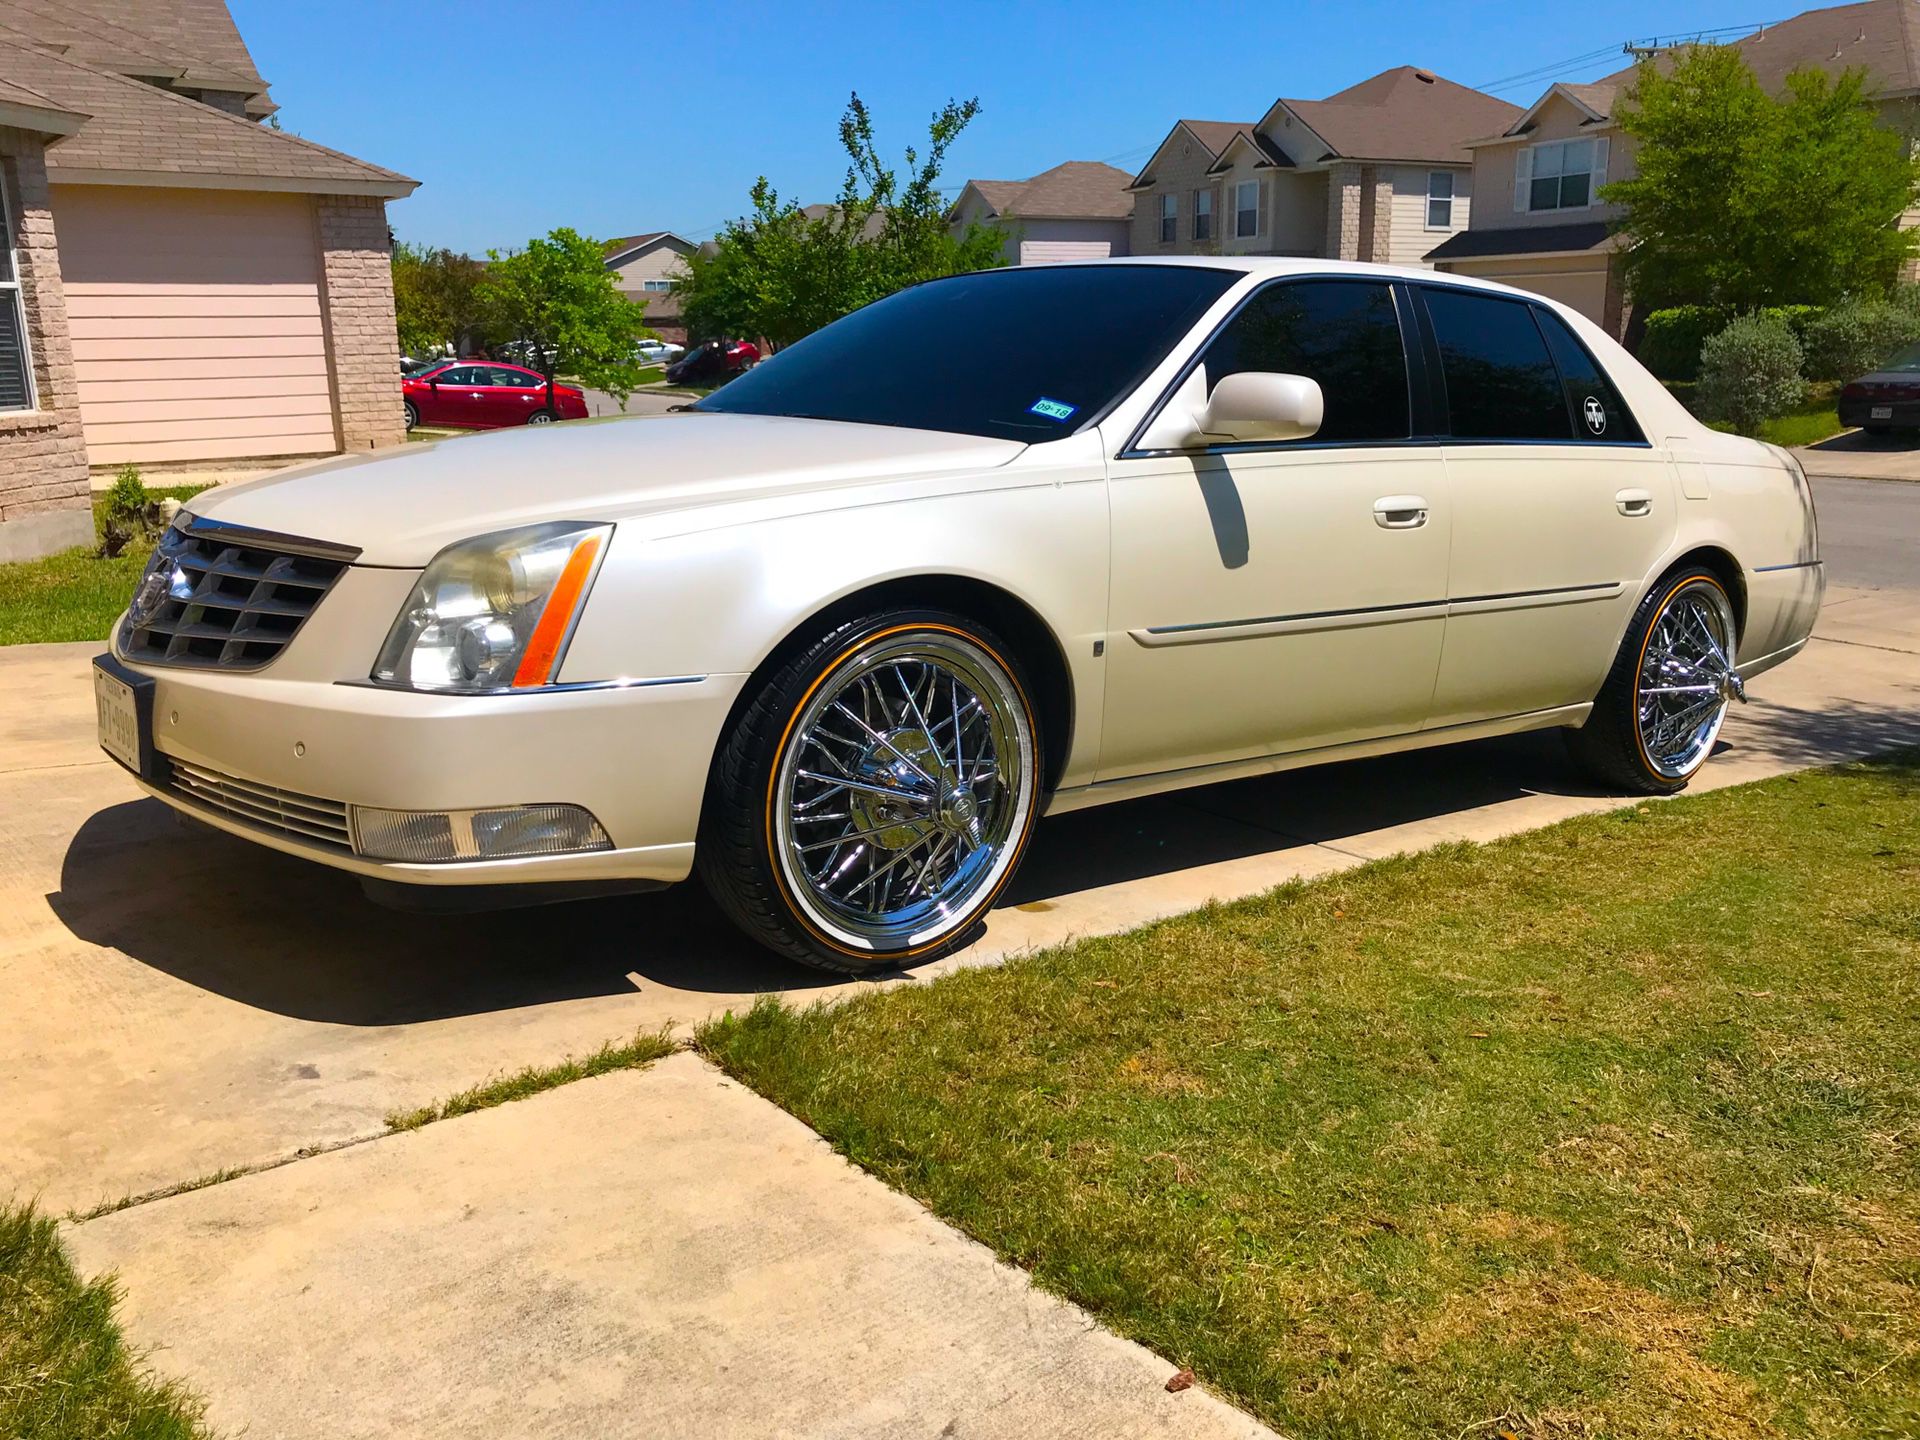 Cadillac DTS 2008 for Sale in San Antonio, TX - OfferUp